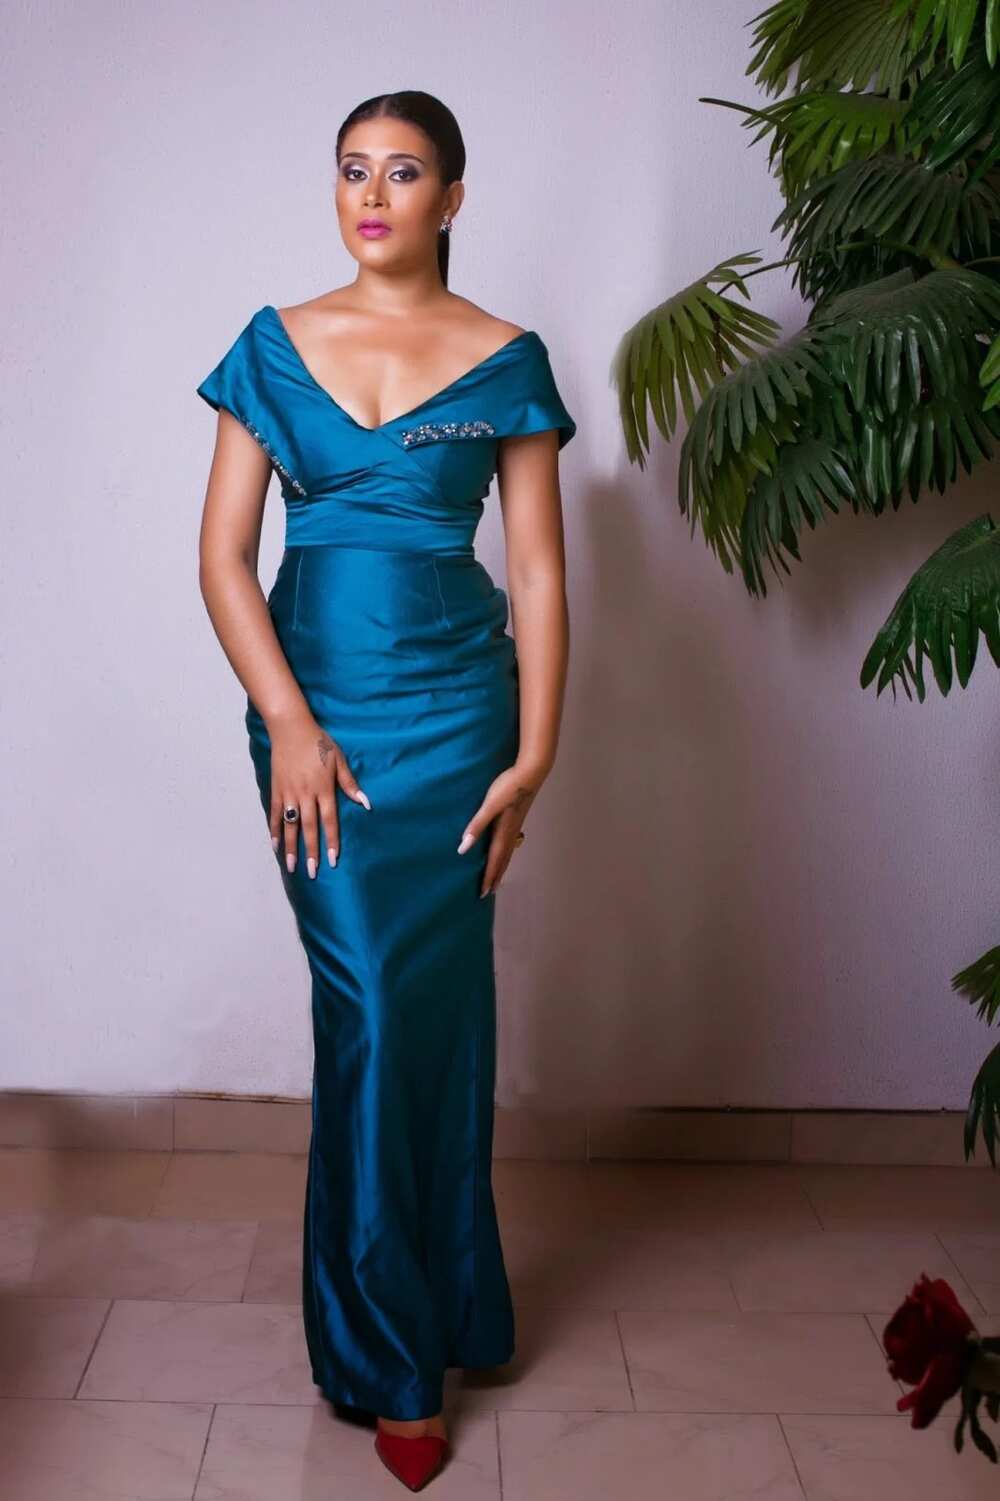 The Craziest Thing A Fan Has Ever Done To Me - Adunni Ade